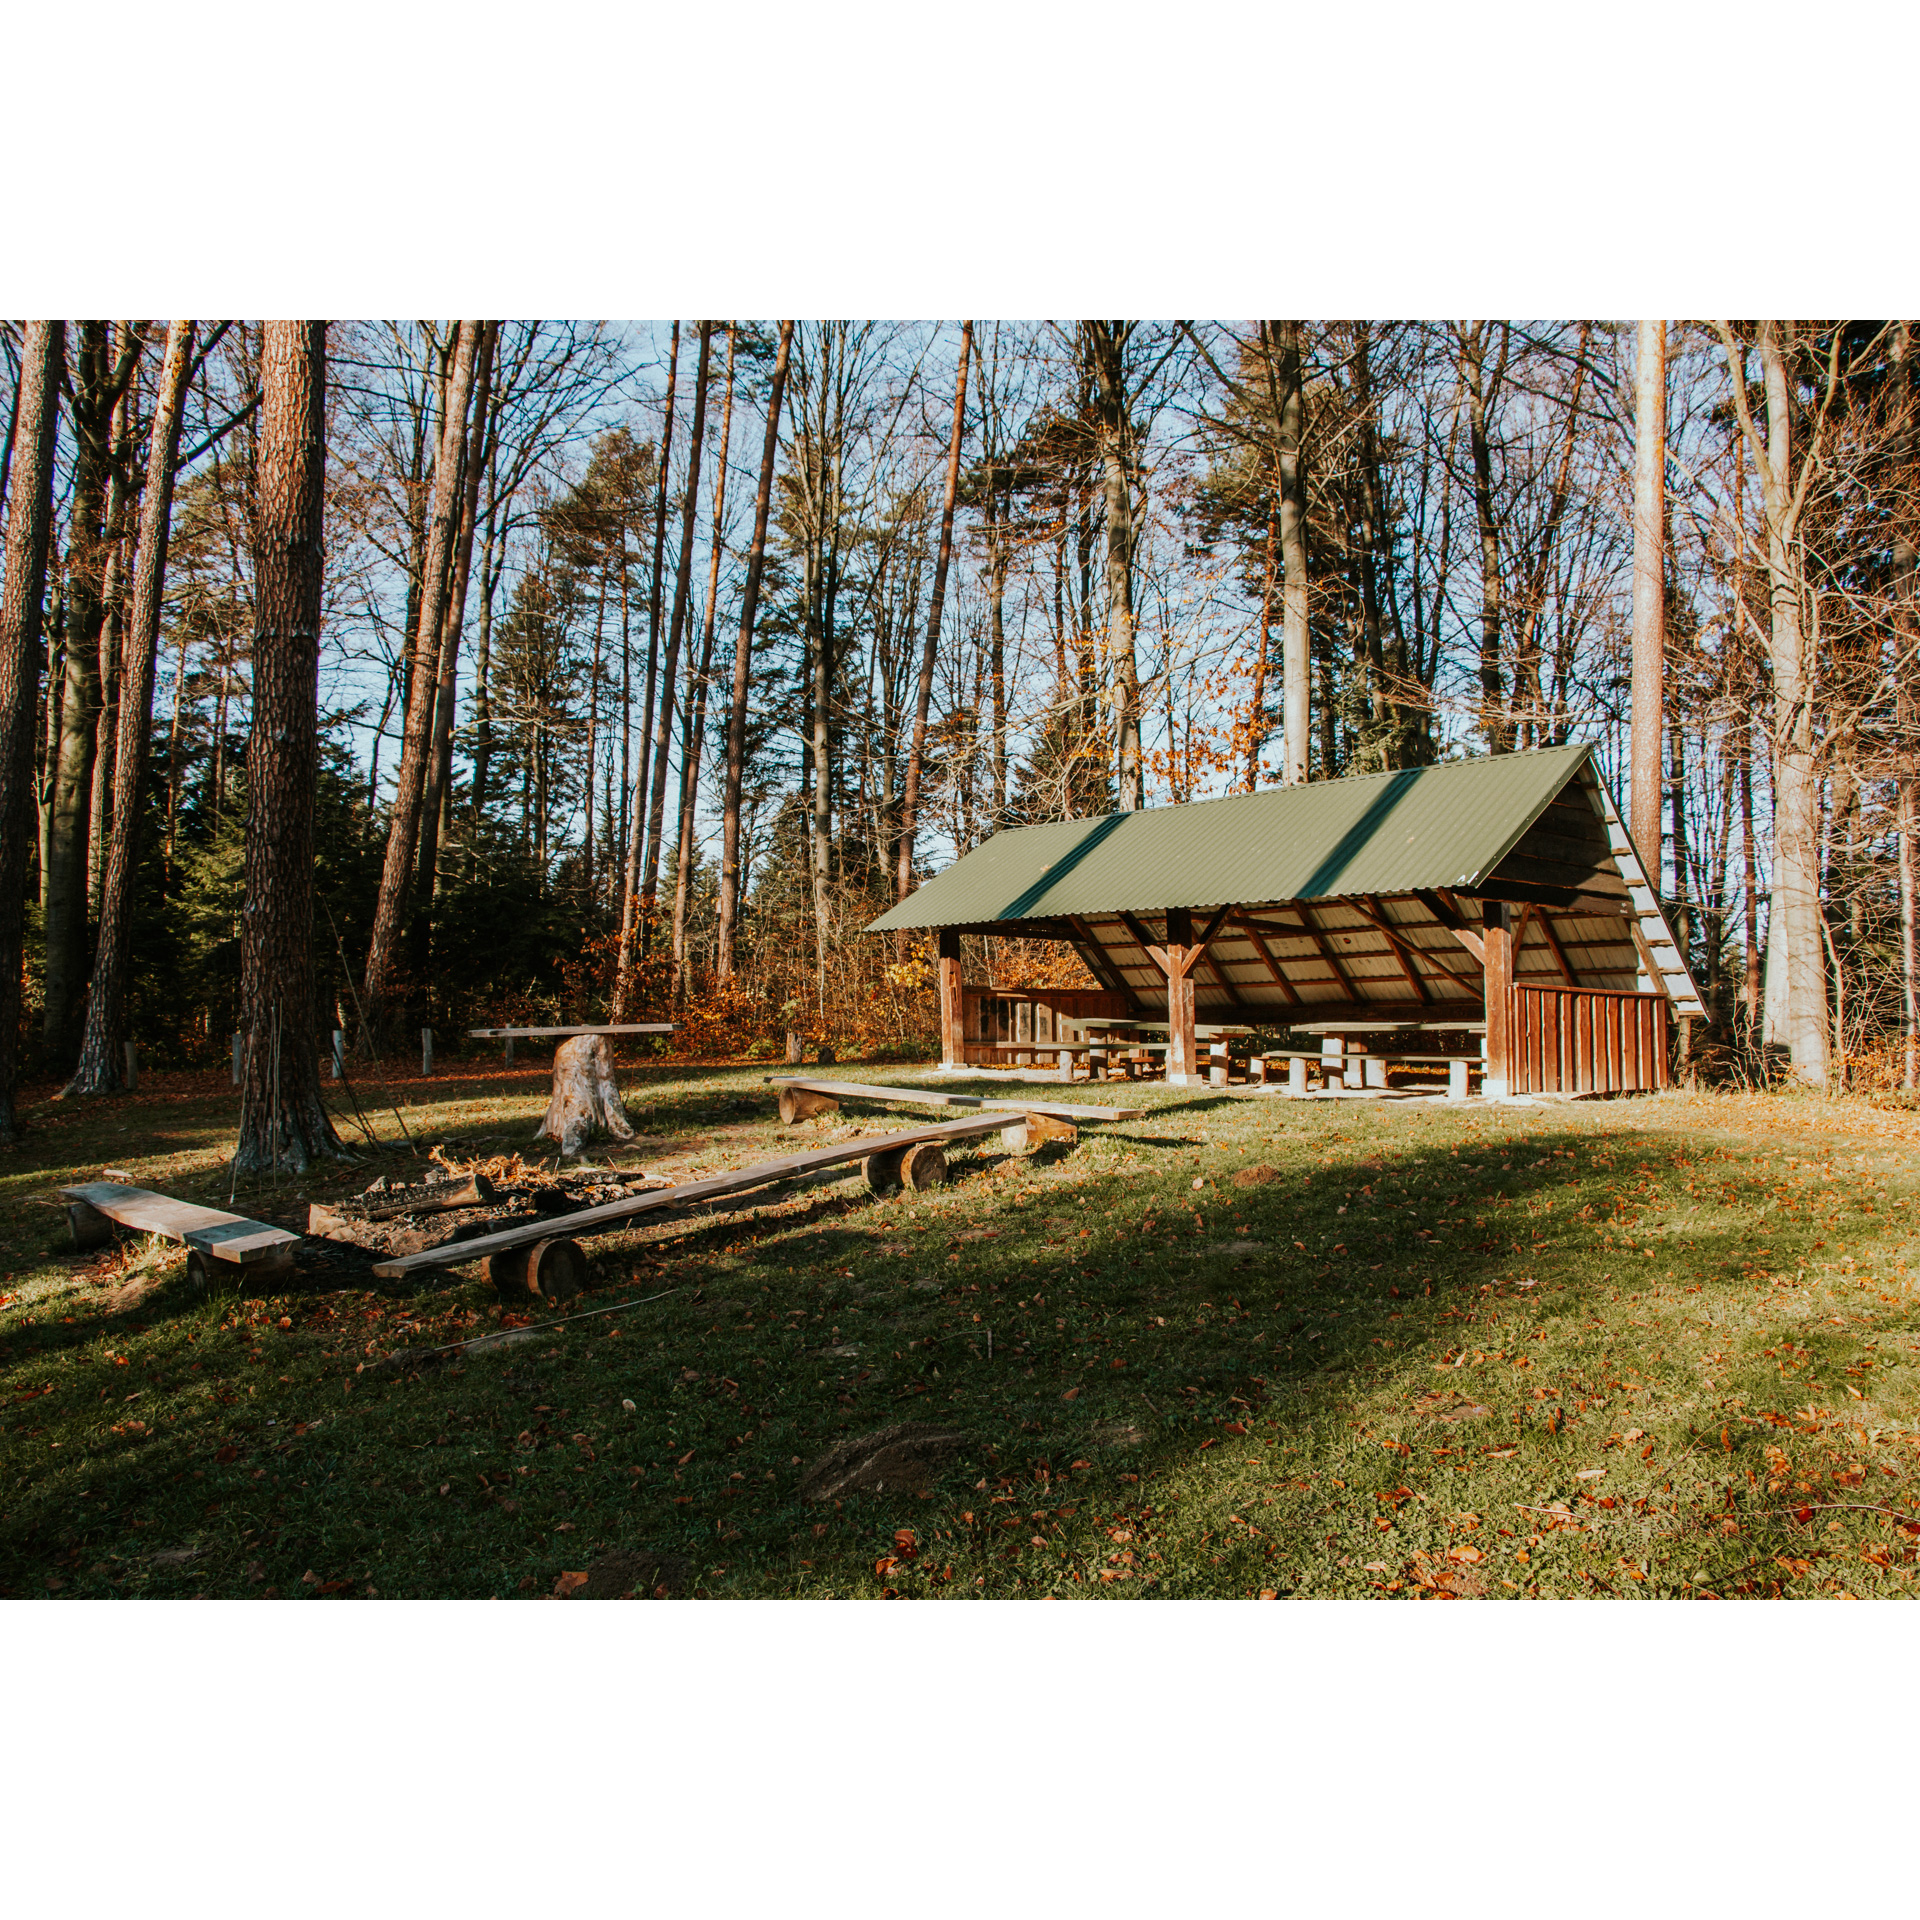 Wooden shelter in the forest with a sloping roof with a fire pit and benches made of tree trunks